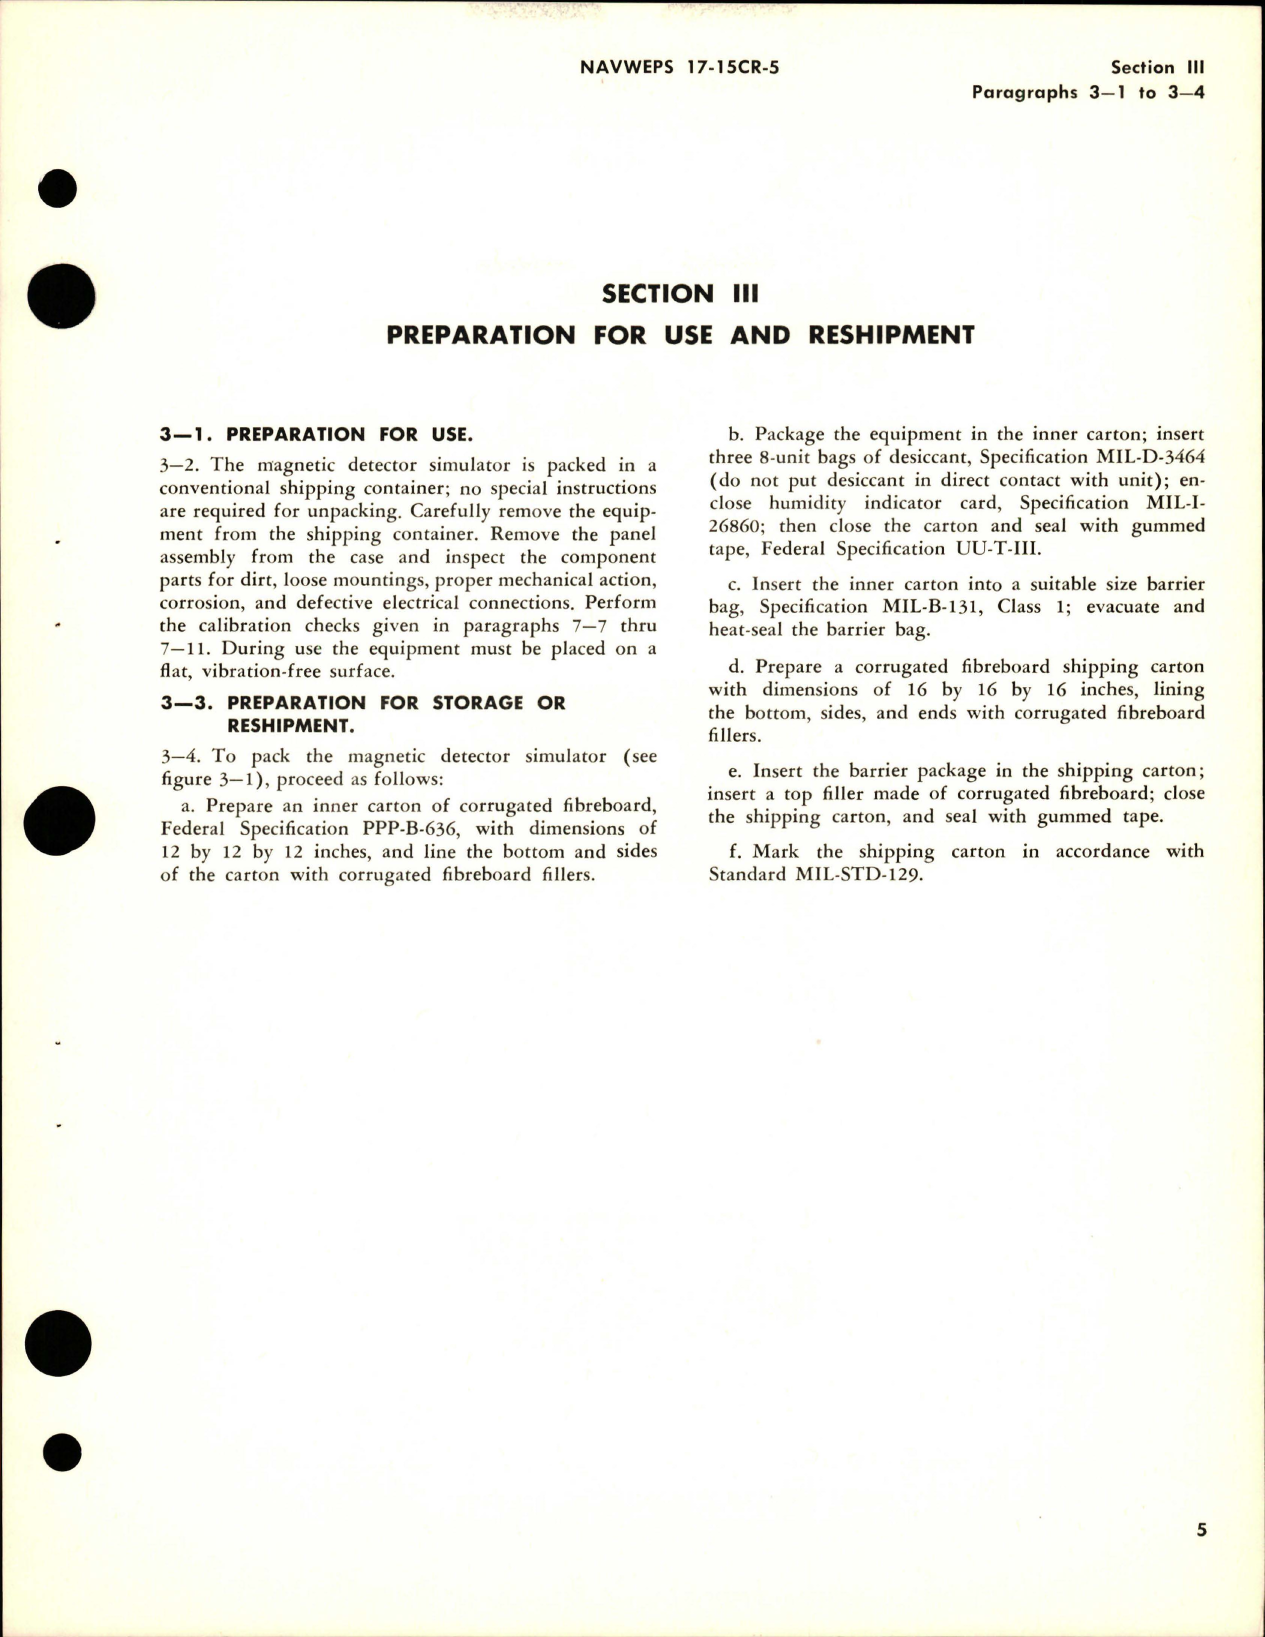 Sample page 9 from AirCorps Library document: Operation and Service Instructions with Illustrated Parts Breakdown for Magnetic Detector Simulator - Part KT319809-2